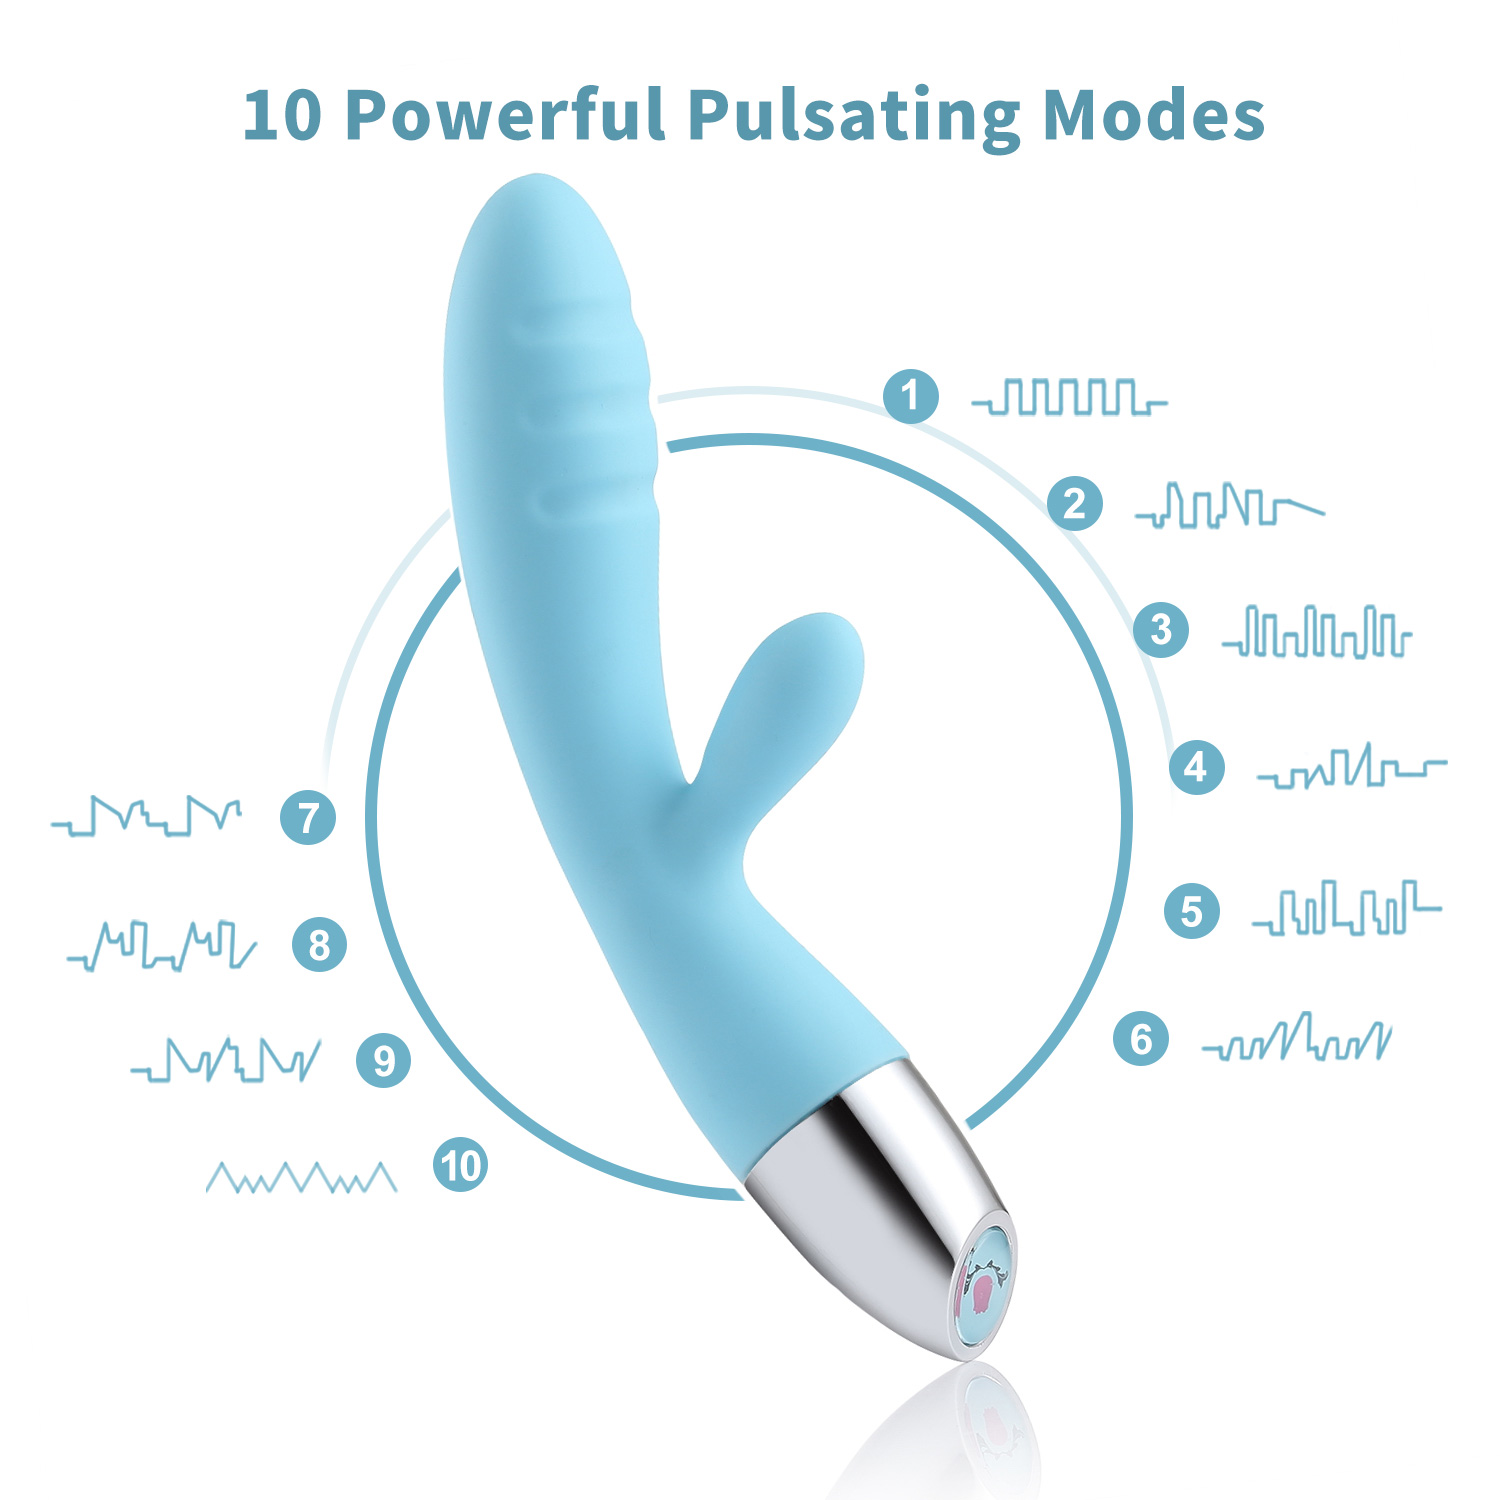 Wowyes Luxeluv V2 Dual Vibrator